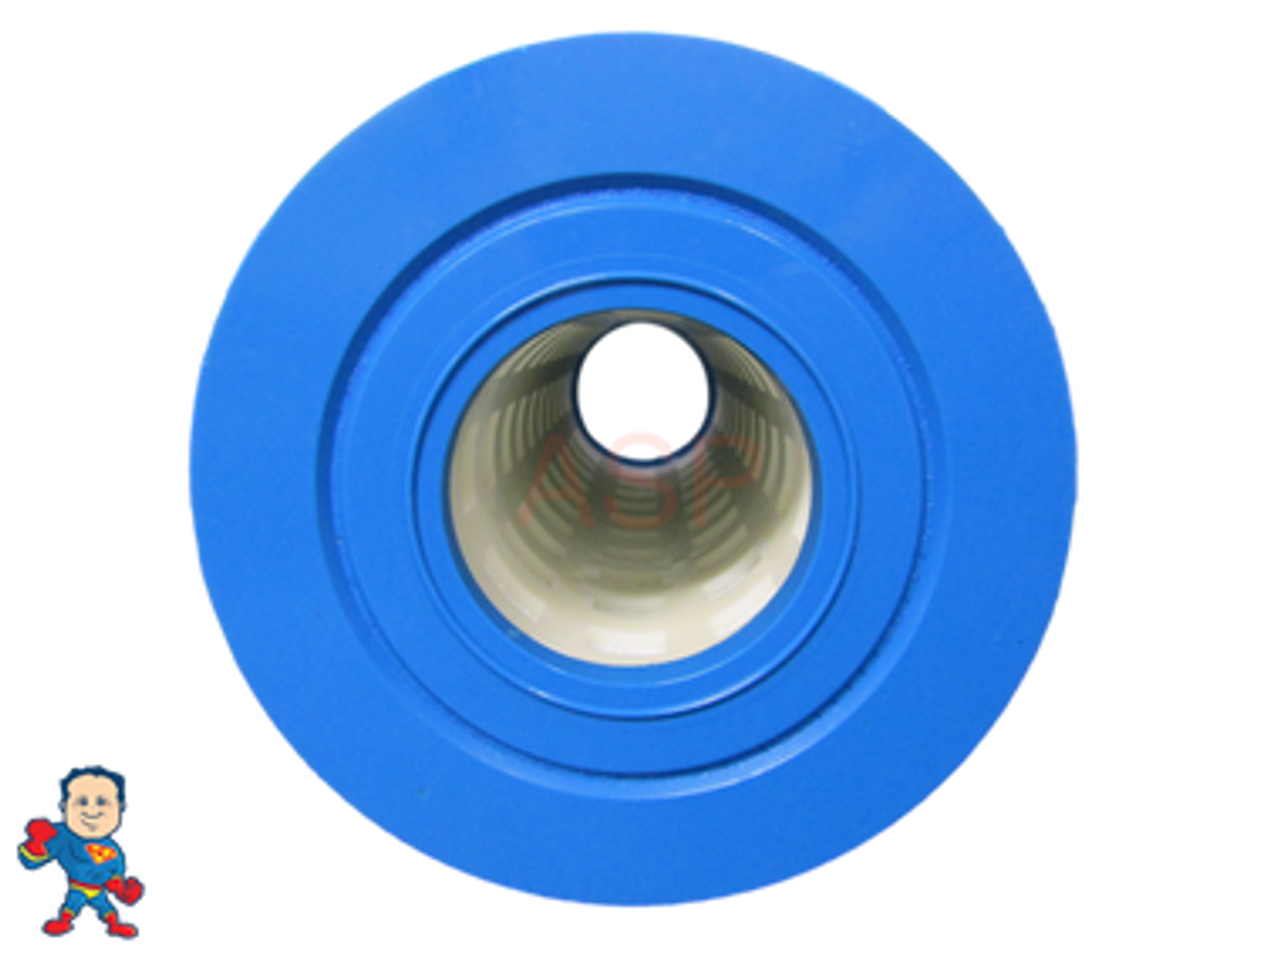 This filter has a 2 1/8" Hole in the top and bottom.
Filter Cartridge 35sqft 9 1/4" Tall x 4-15/16" with 2 1/8" Hole on Top and Bottom